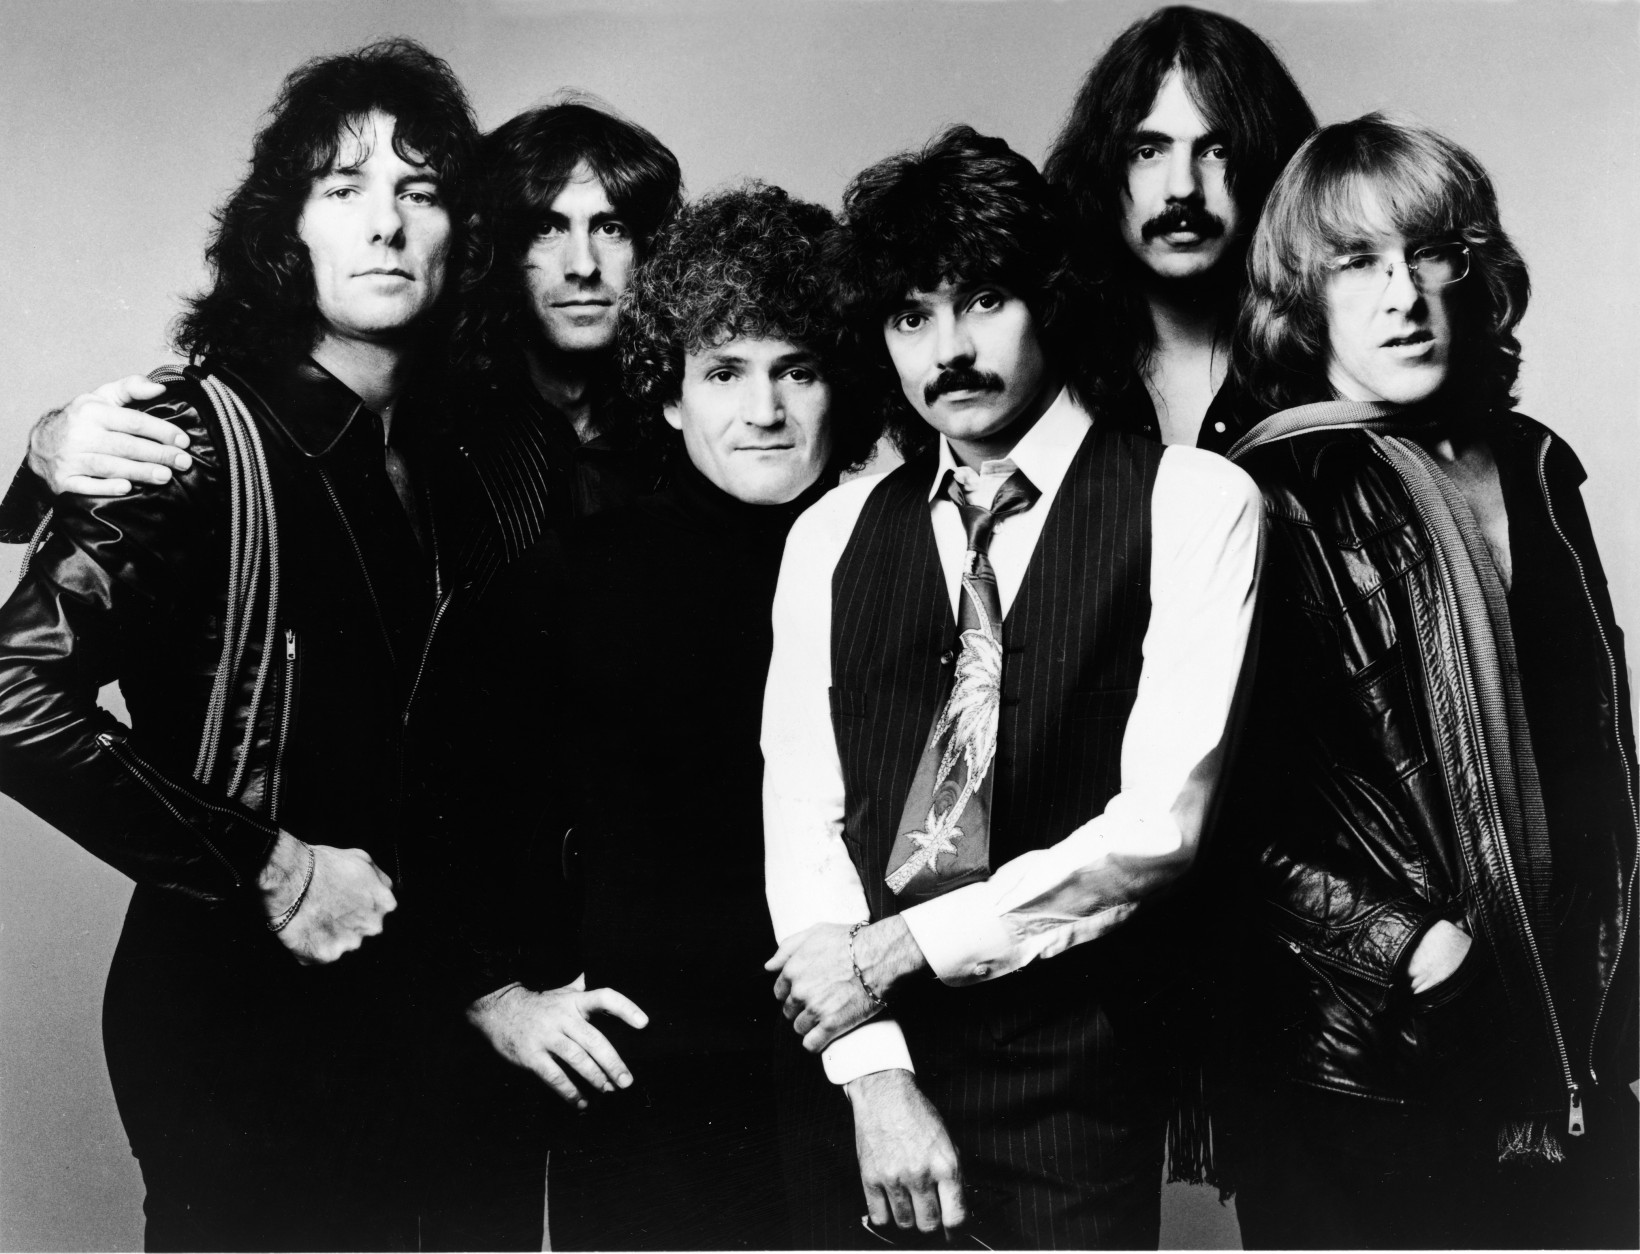 Promotional studio portrait of American rock group Jefferson Starship, 1970s. L-R: Aynsley Dunbar, Pete Sears, David Freiberg, Mickey Thomas, Craig Chaquico and Paul Kantner. (Photo by Hulton Archive/Getty Images)